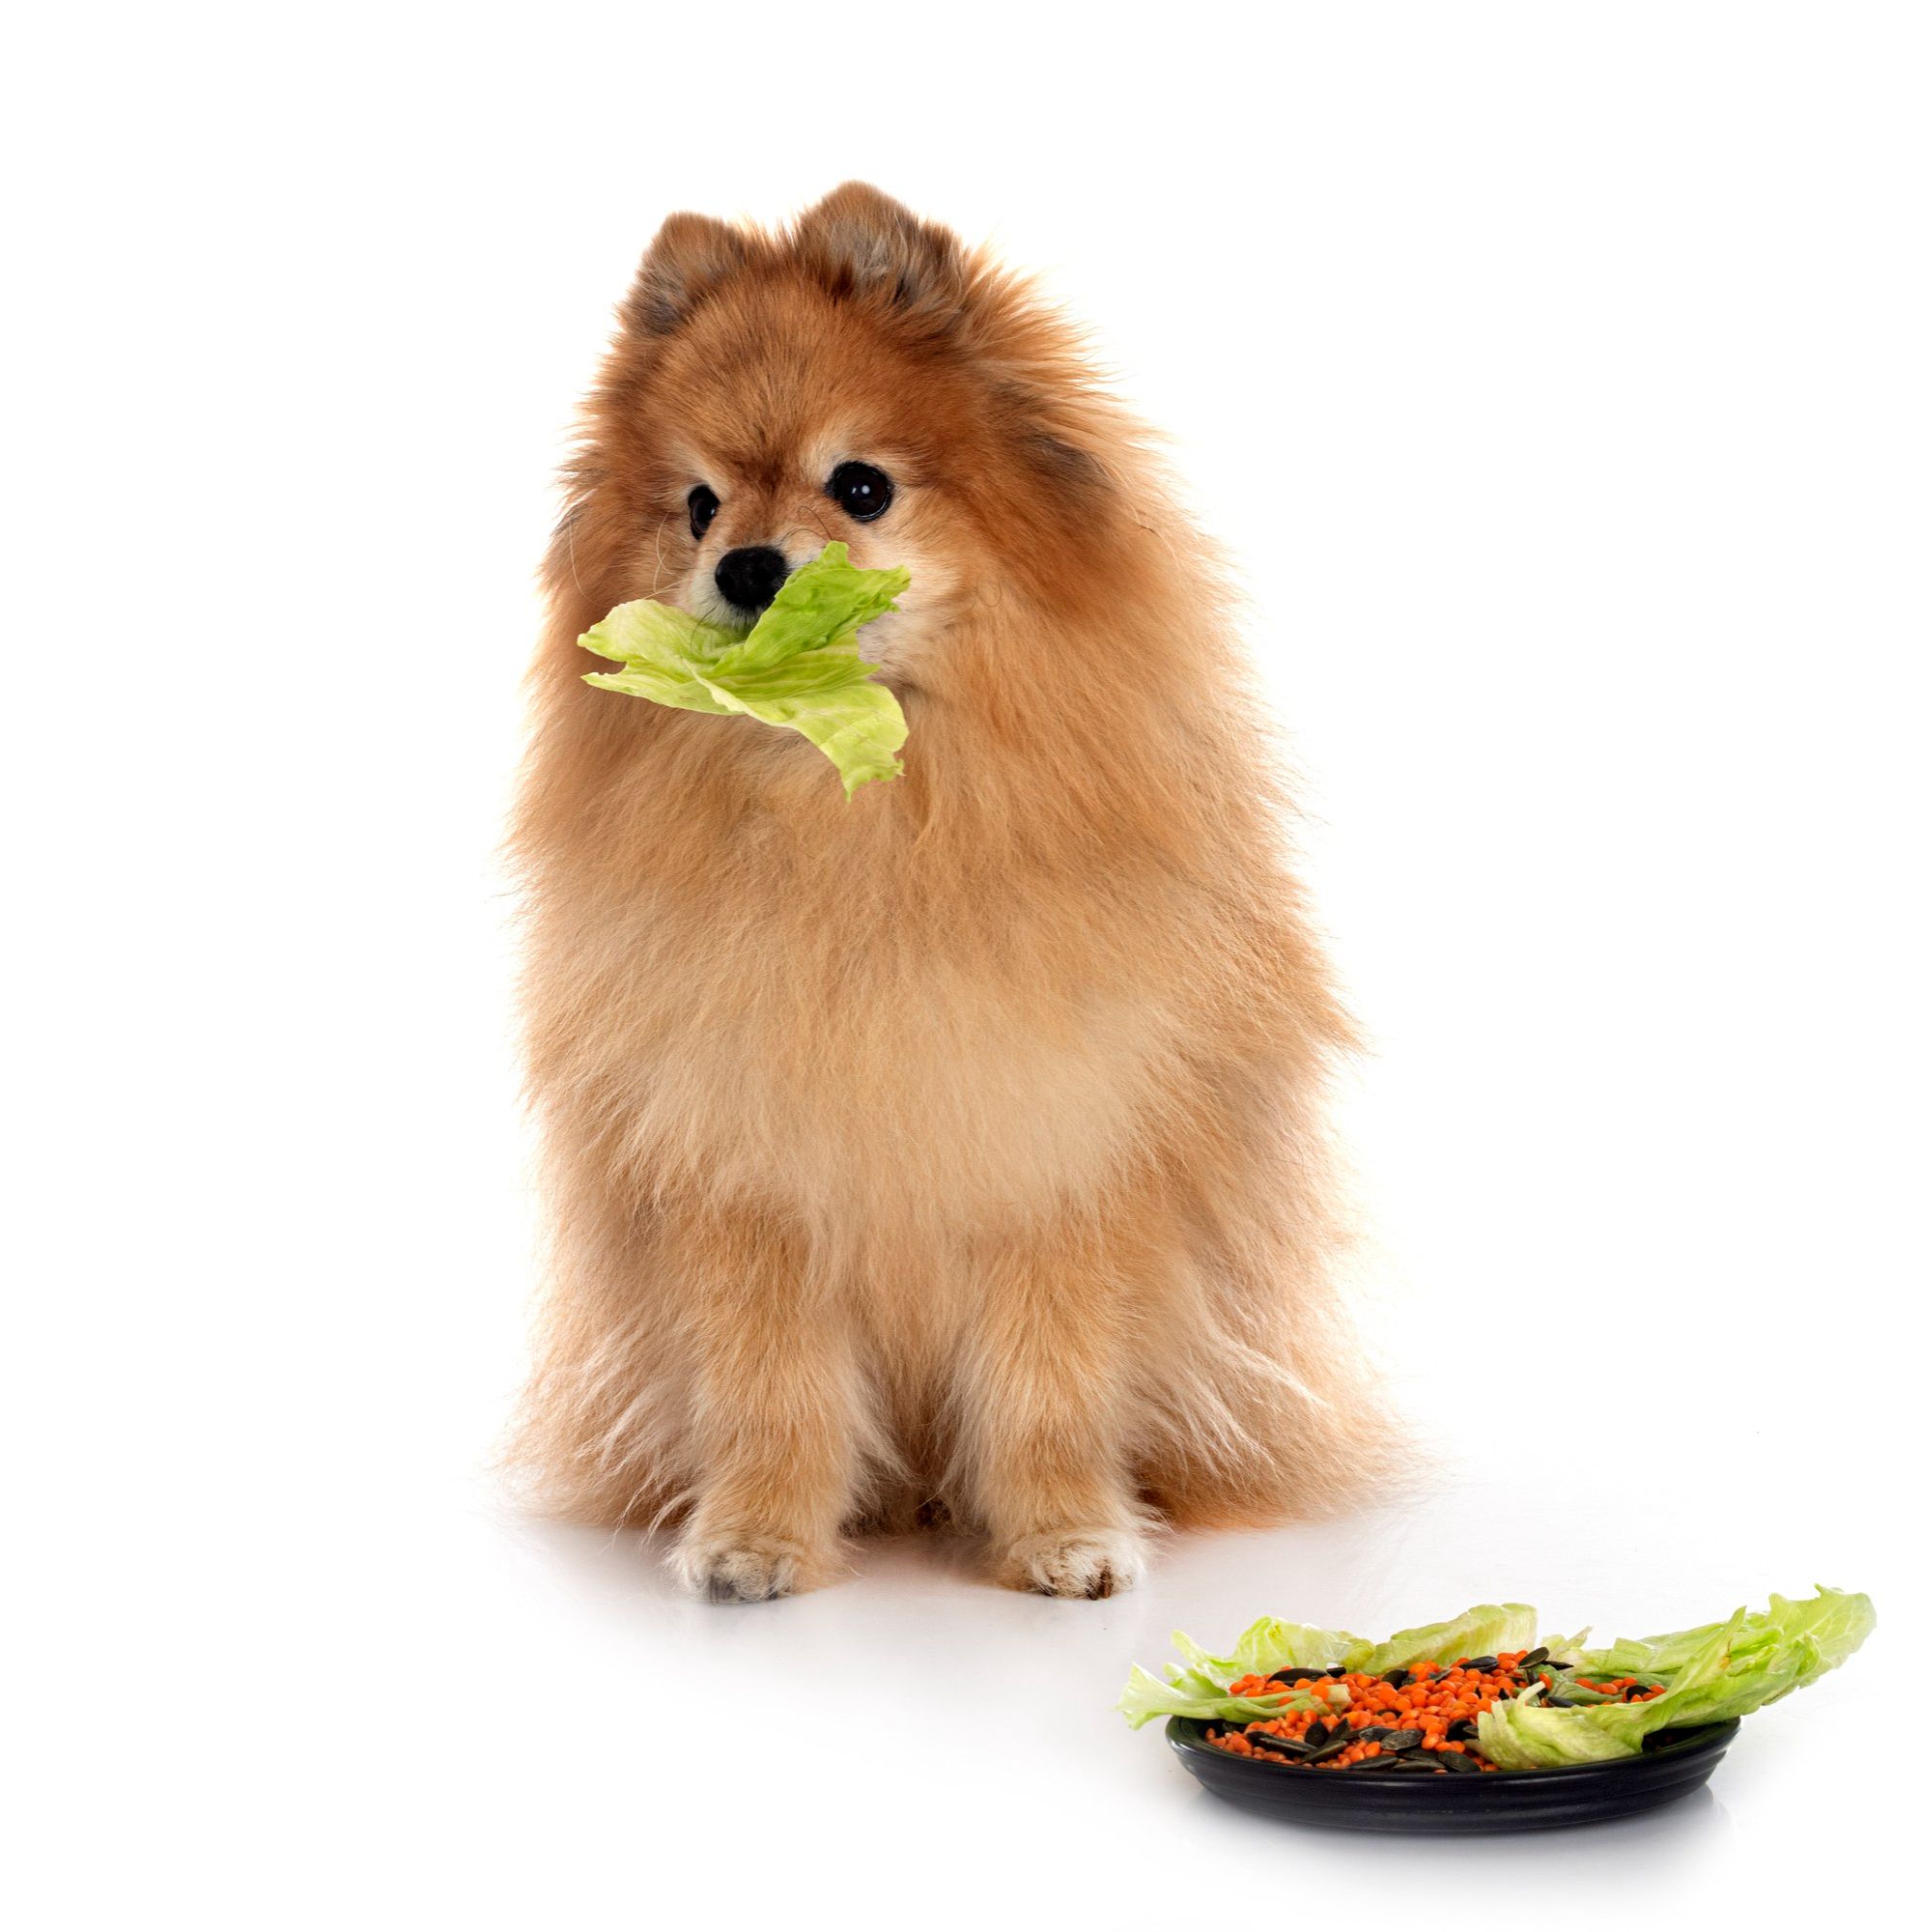 Can Dogs Eat Celery? Is Celery Safe For Dogs?